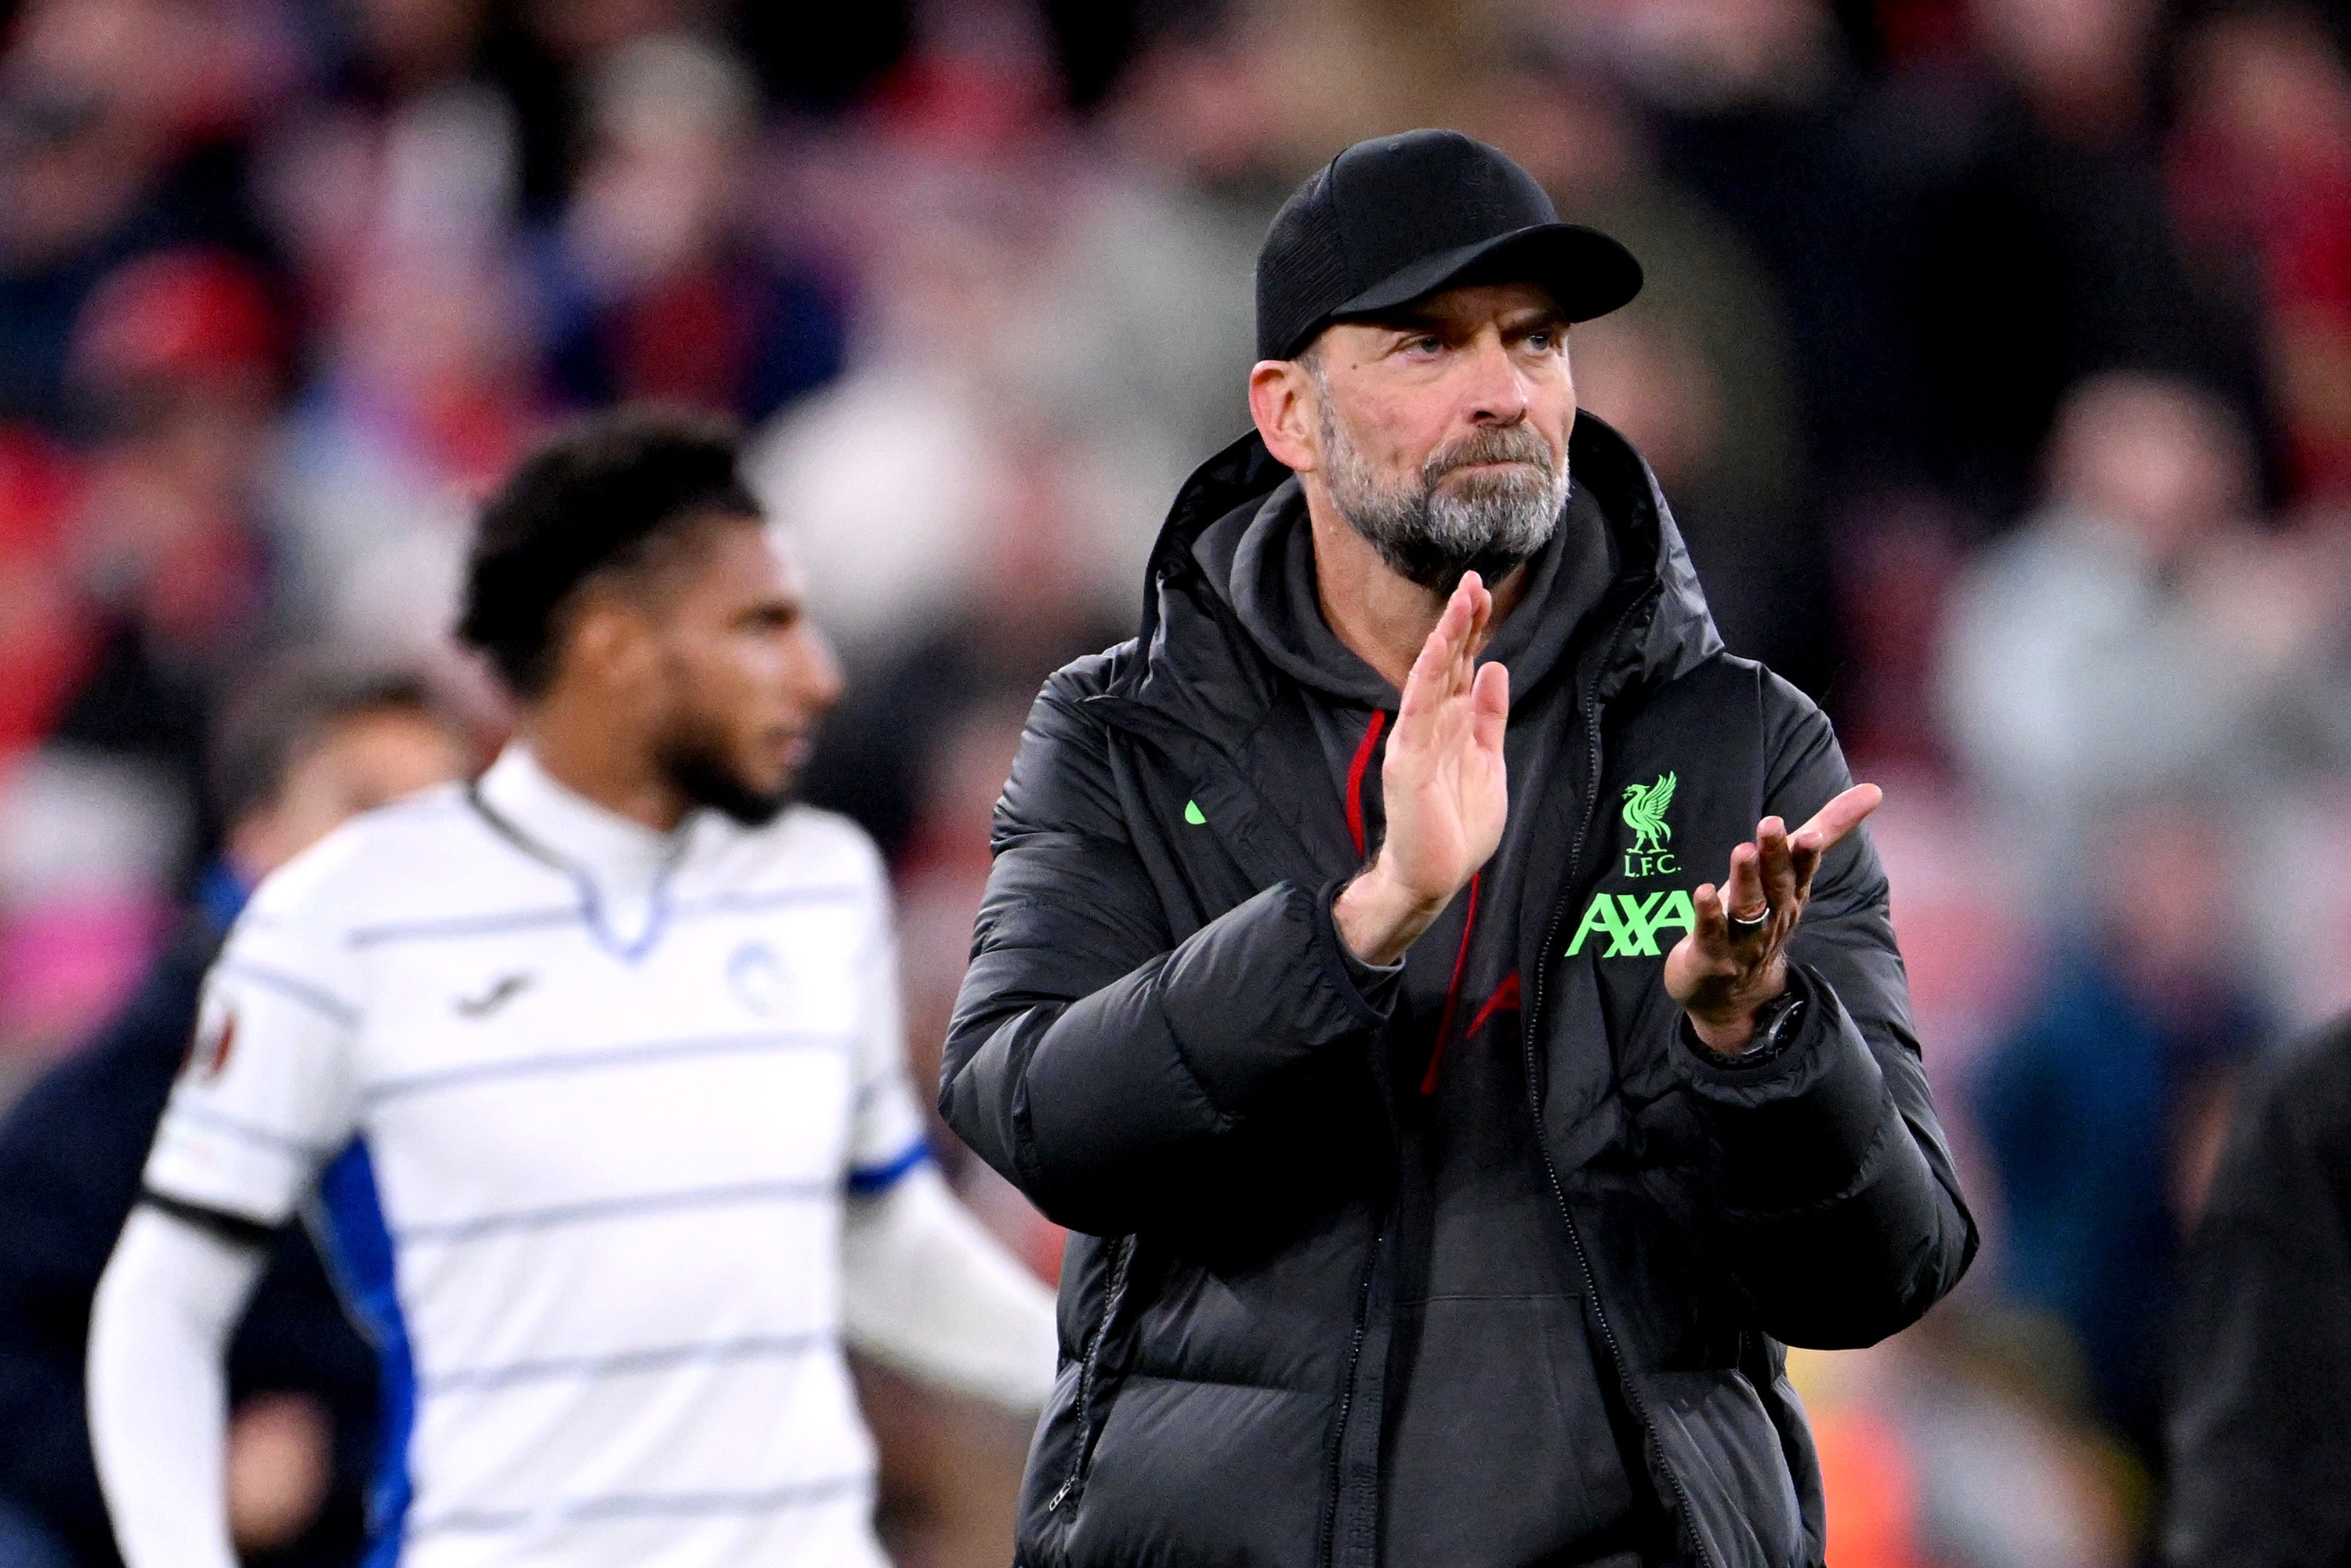 Jurgen Klopp can do nothing but applaud the top-class performance Atalanta put in against Liverpool.